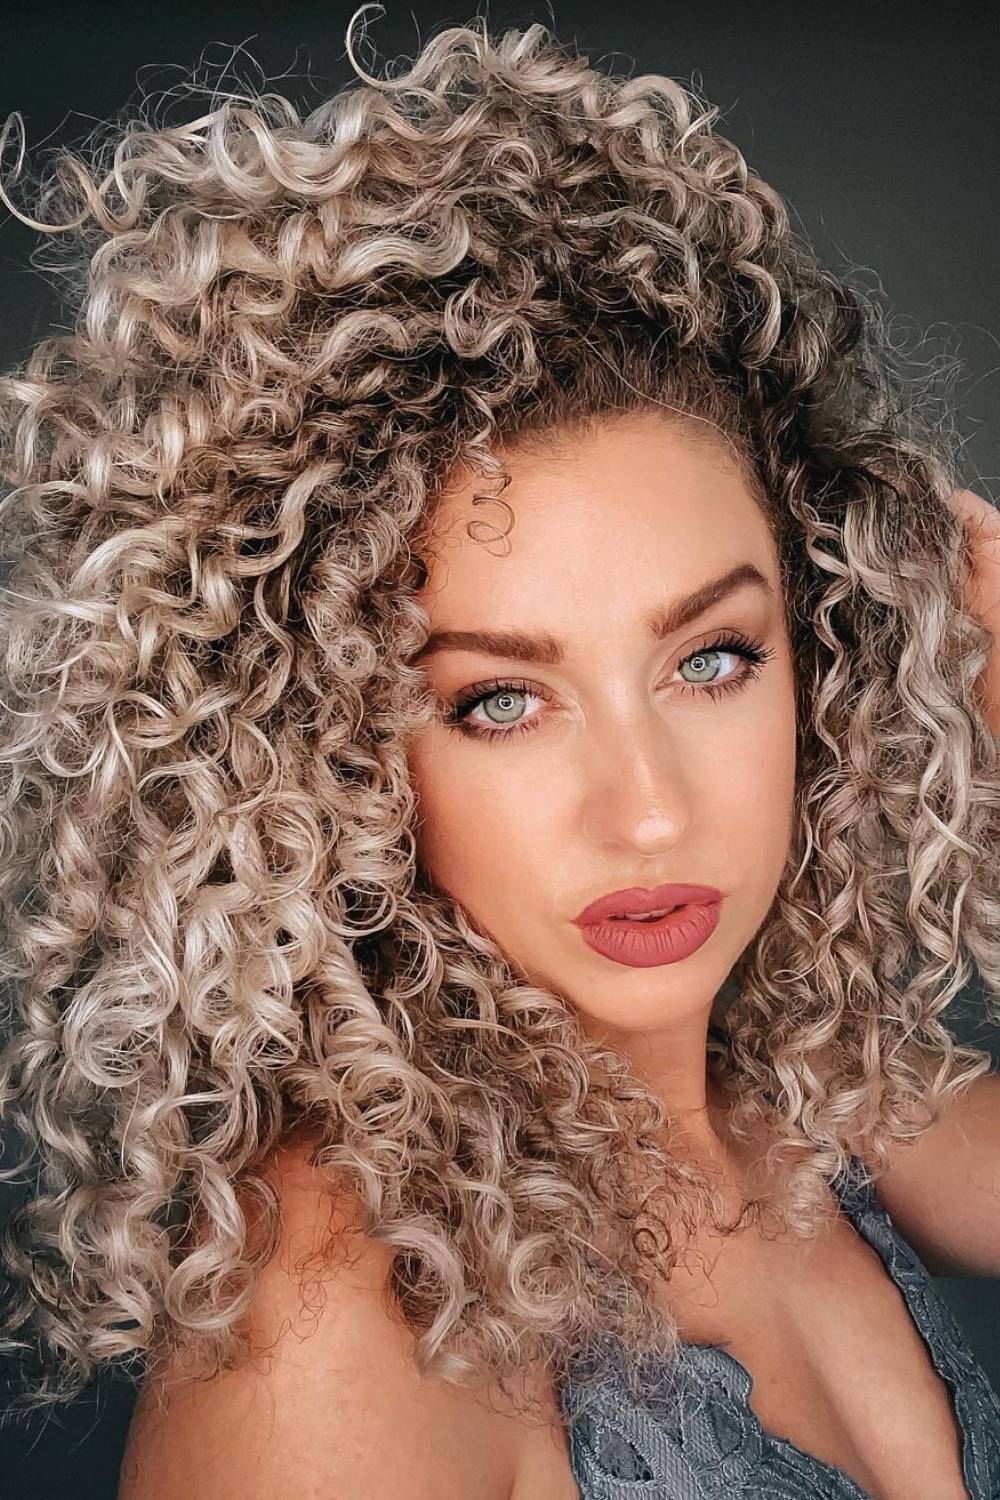 Curly blonde